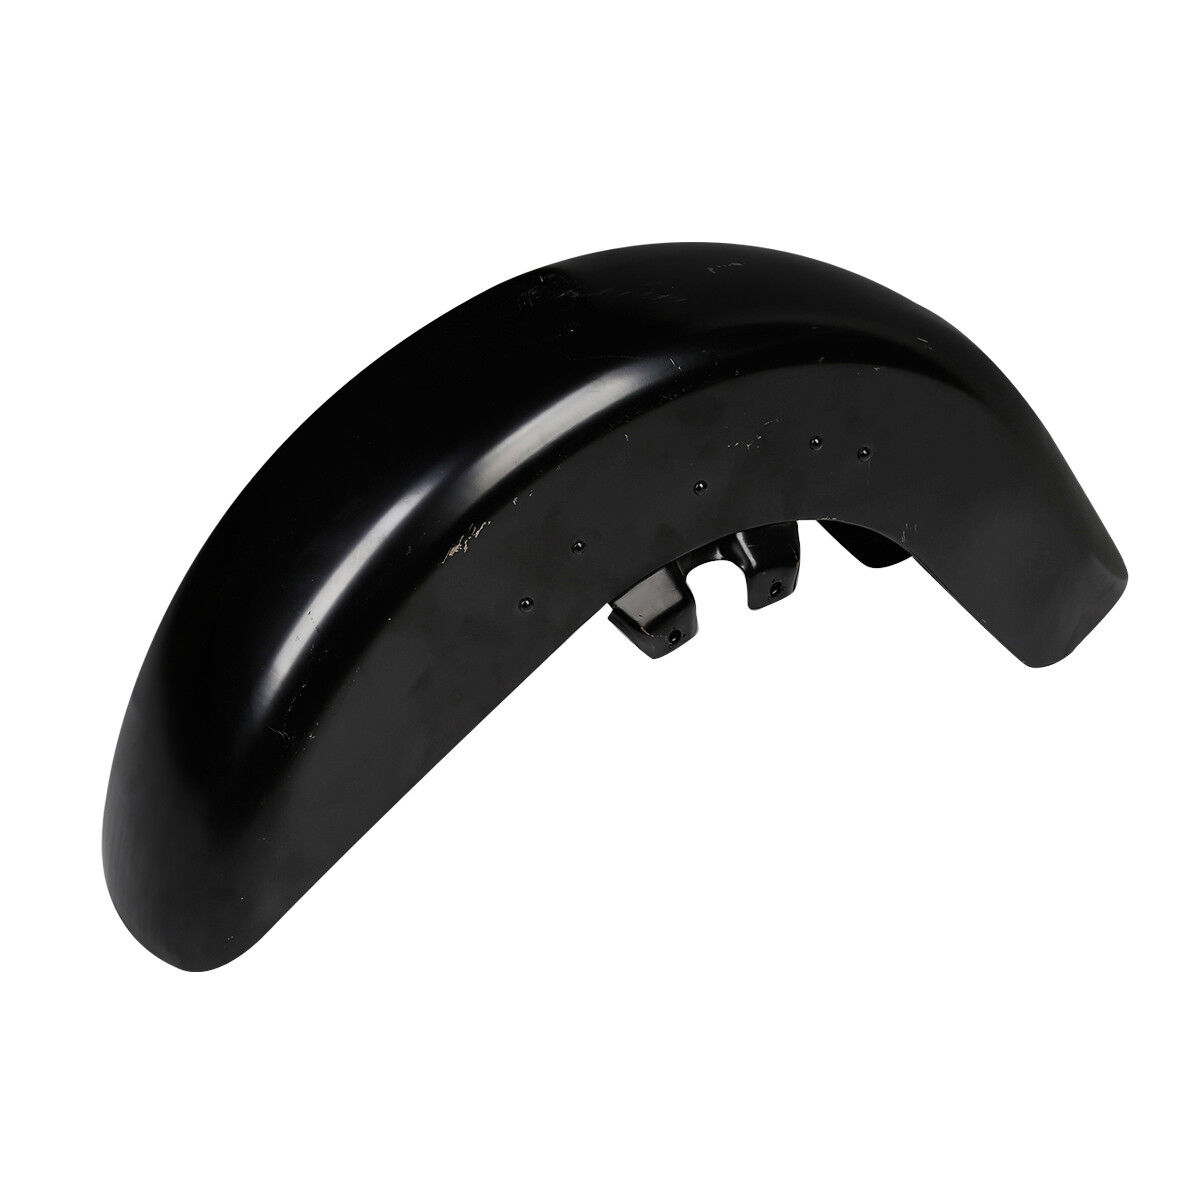 Unpainted Black Front Fender Fit For Harley Touring CVO Road Street Glide 89-13